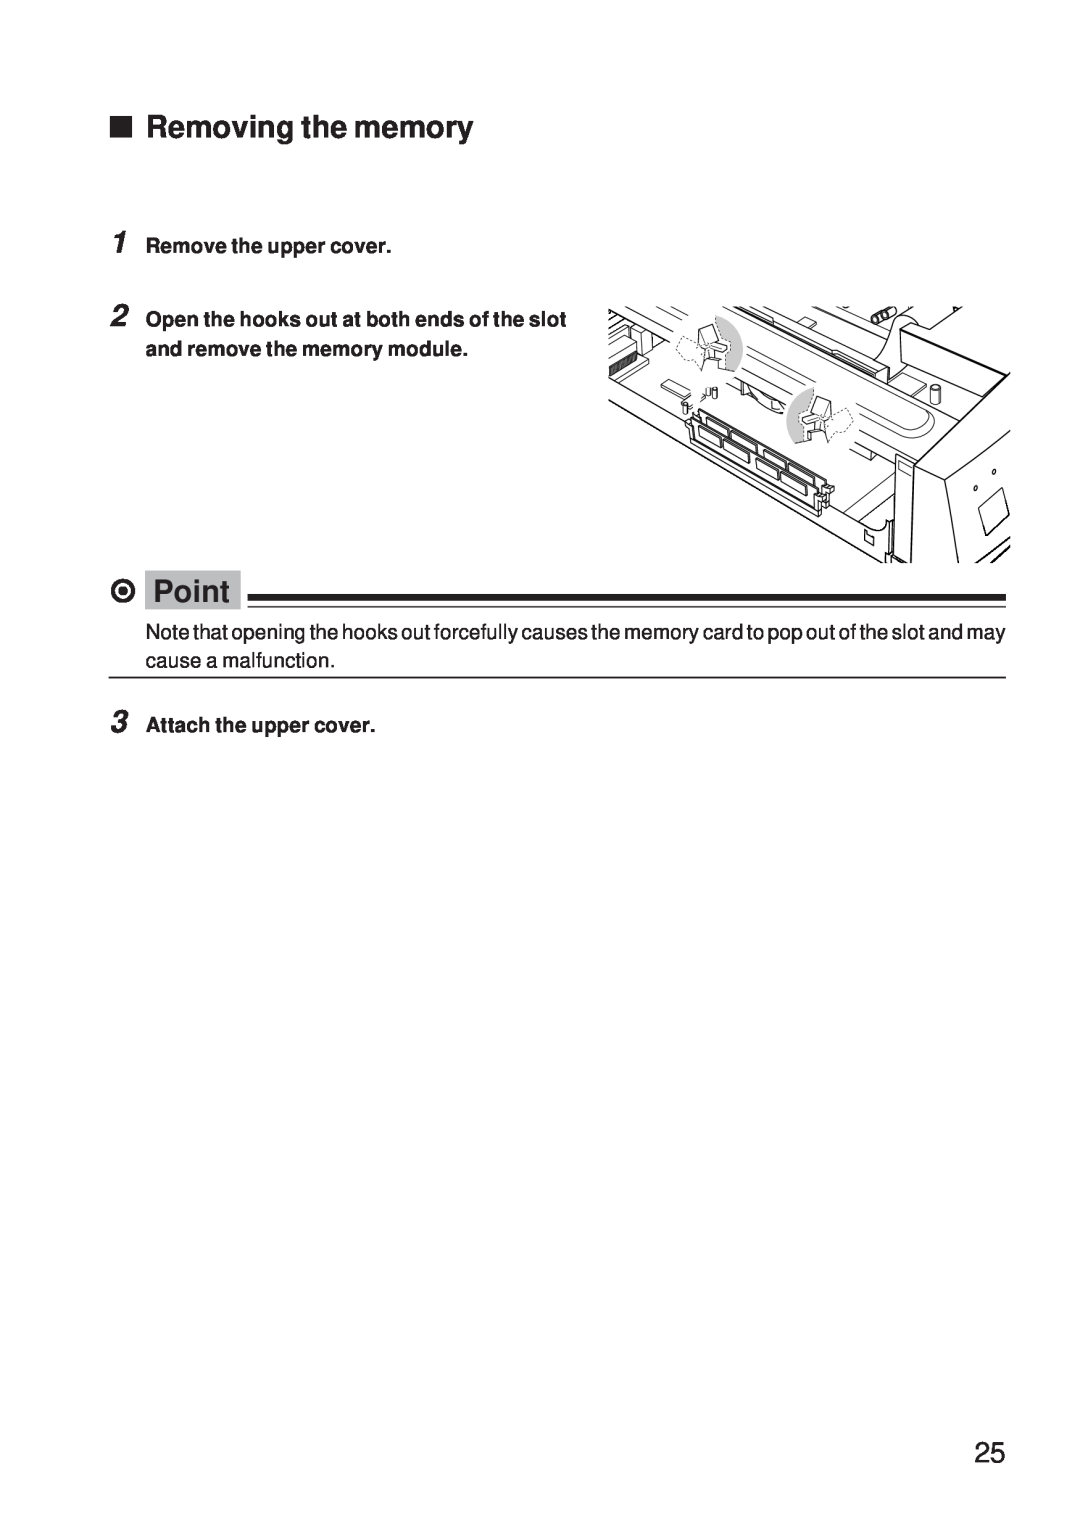 Fujitsu 5000 user manual Removing the memory, Attach the upper cover, ⁄ Point, Remove the upper cover 